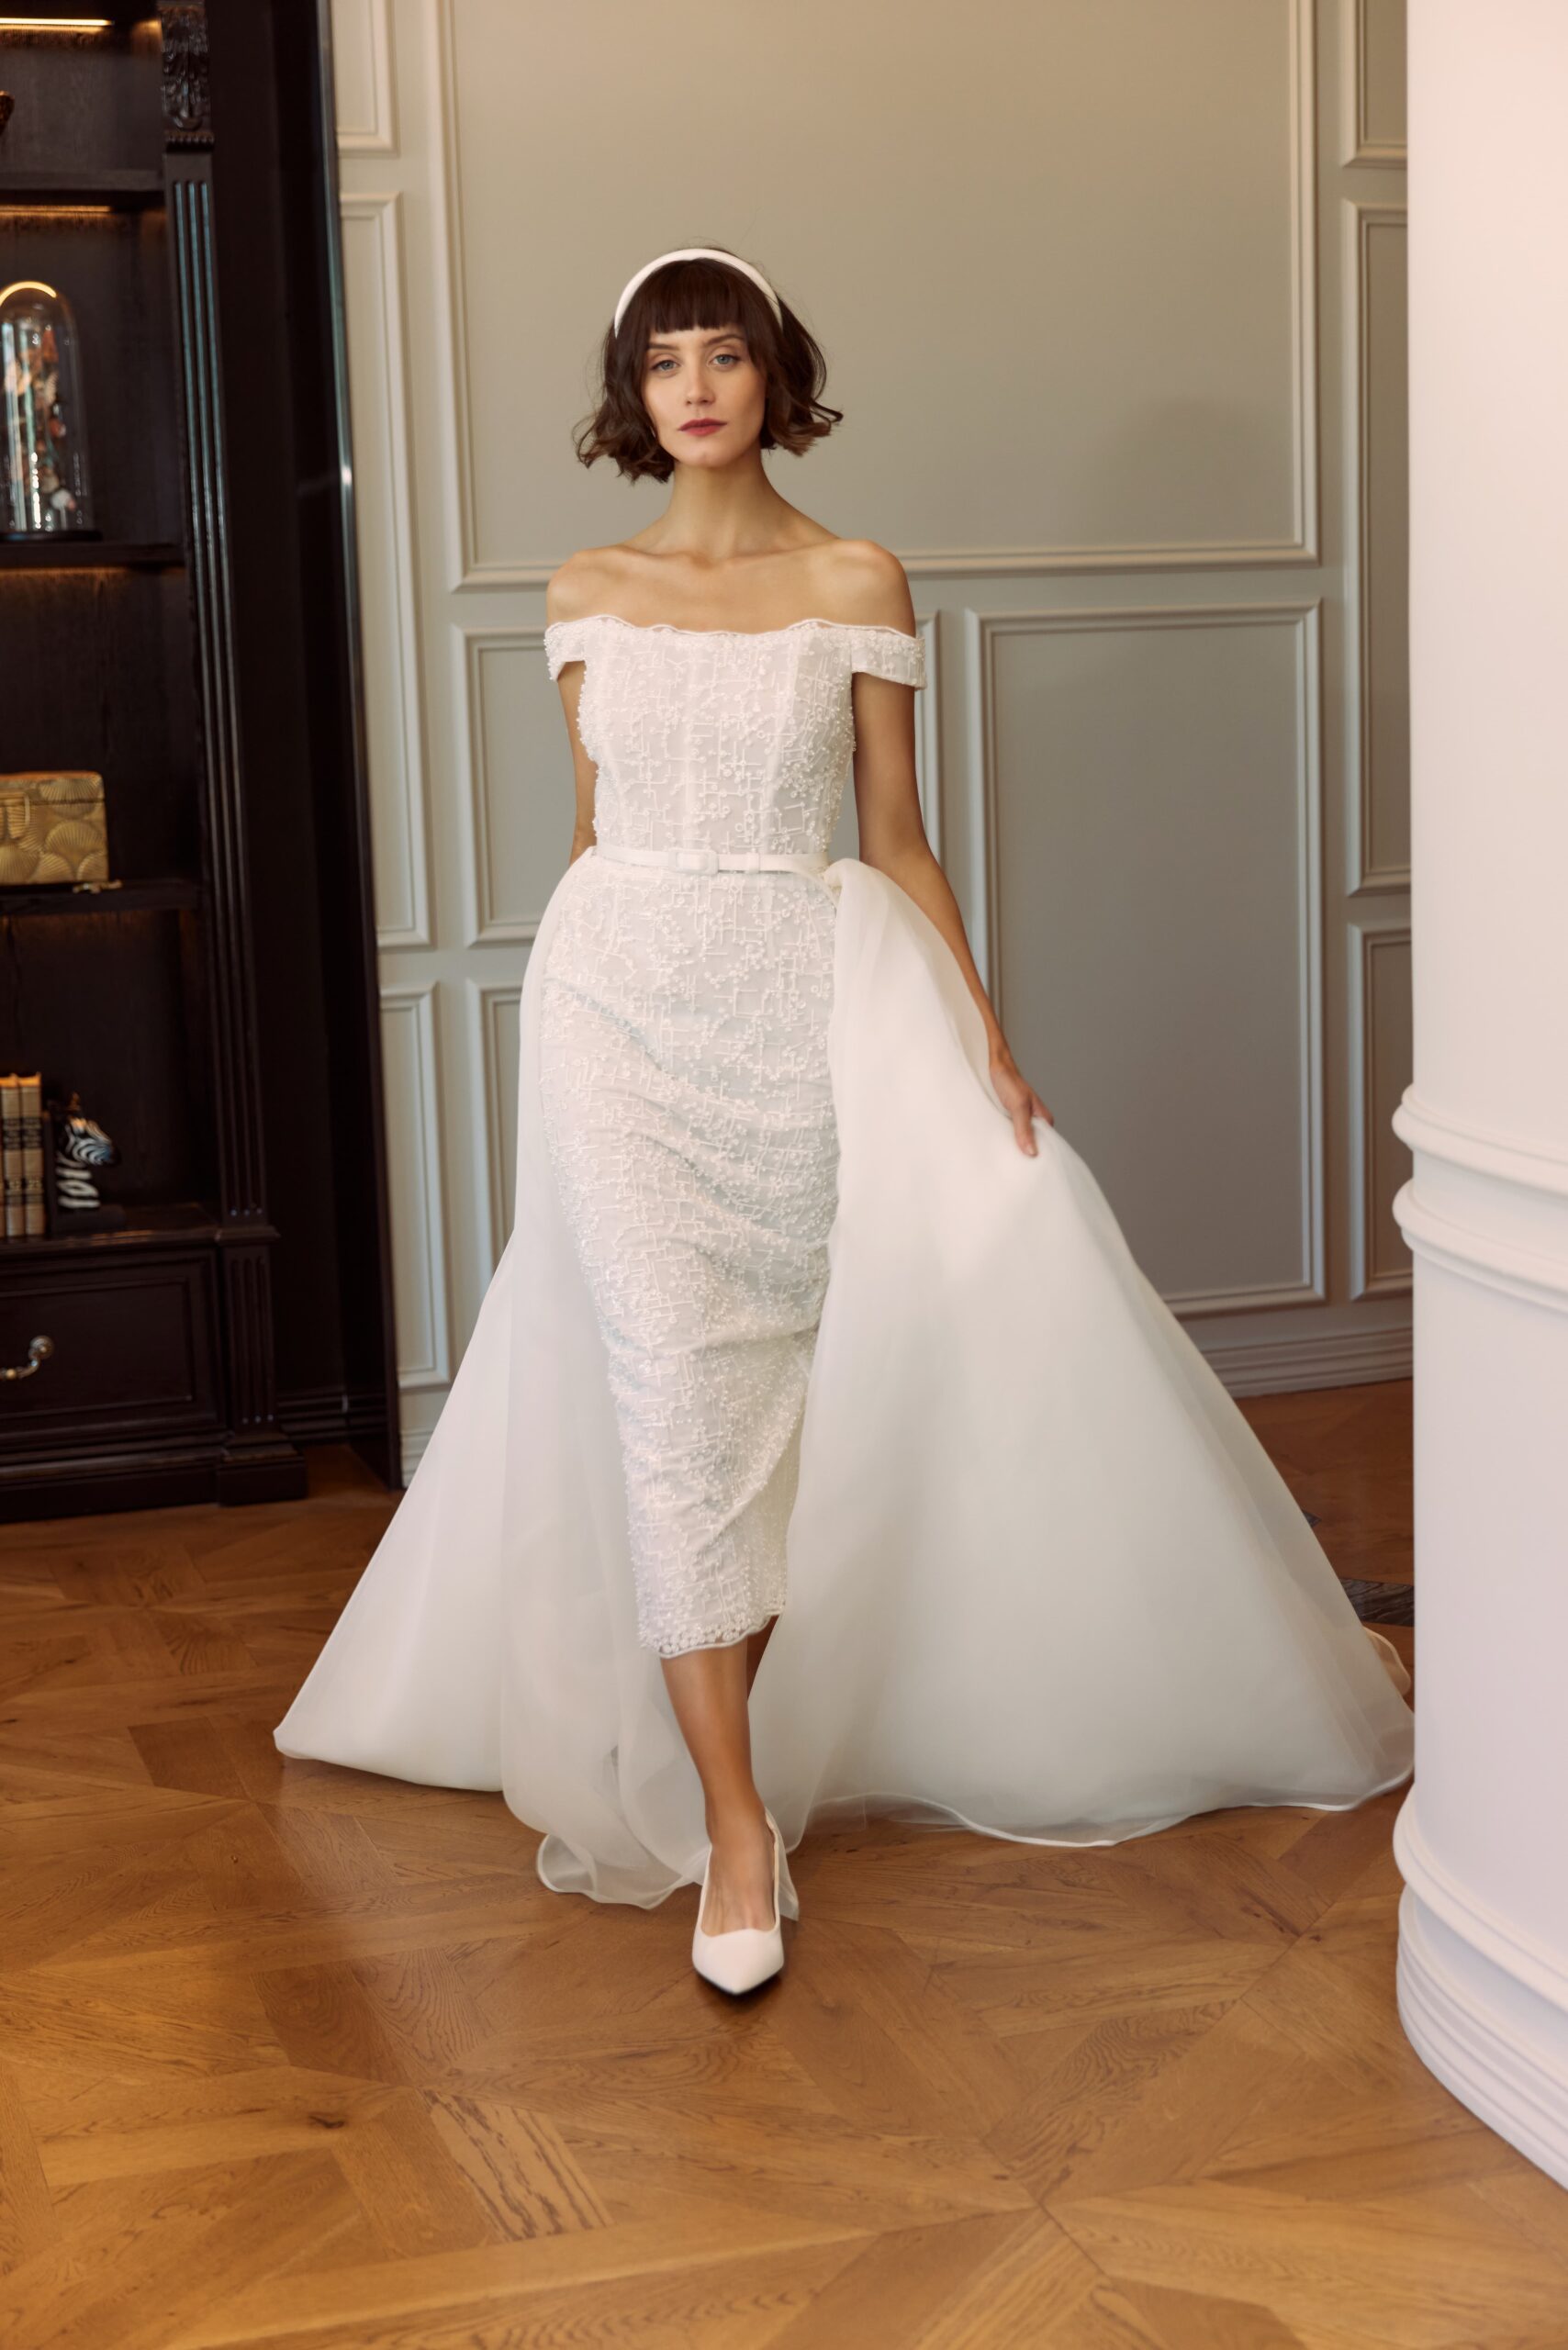 Bijou dress and Mon Cherie train - an off-the-shoulder dress in an embroidered and beaded tulle worn with an organza overskirt. Bijou finishes at the high ankle point.